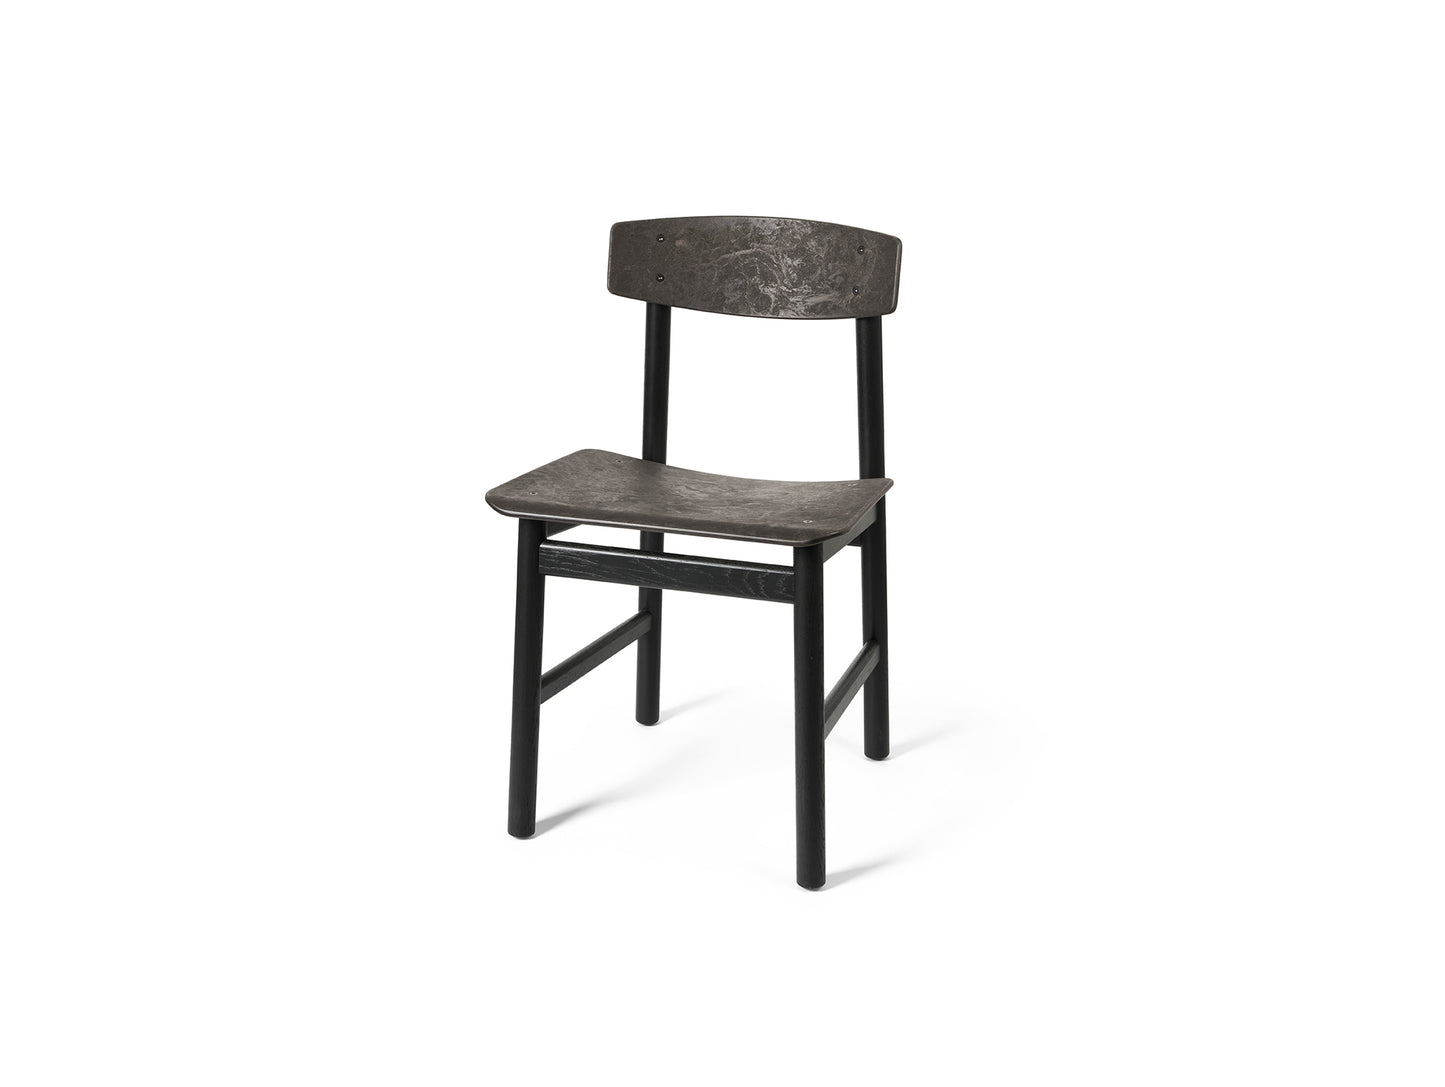 Conscious Chair 3162 by Mater - Black Stained Oak / Coffee Waste Black